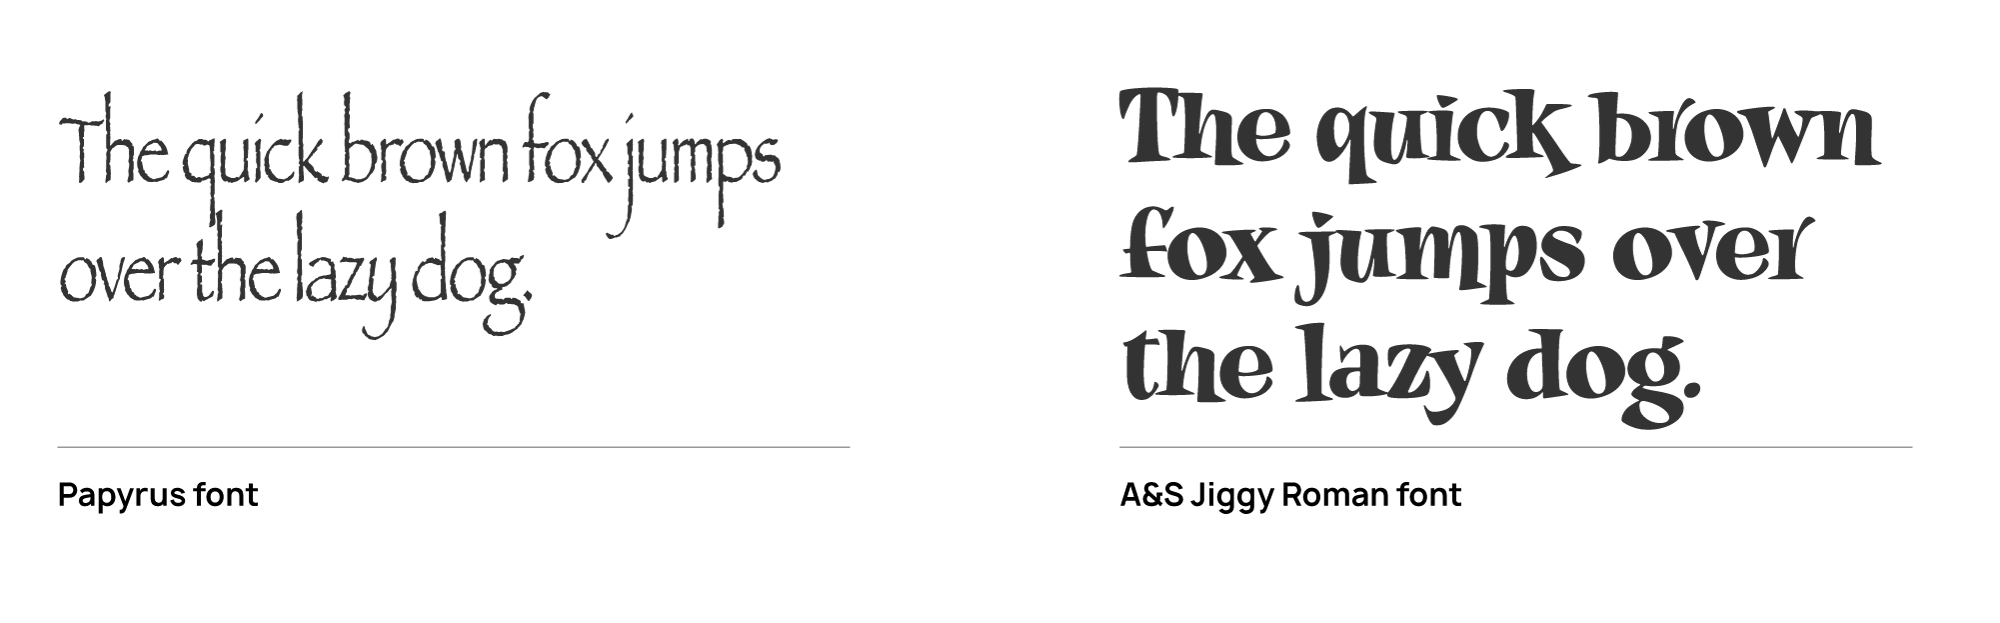 The phrase "The quick brown fox jumped over the lazy dog" appears in Papyrus font and A&S Jiggy Roman font.